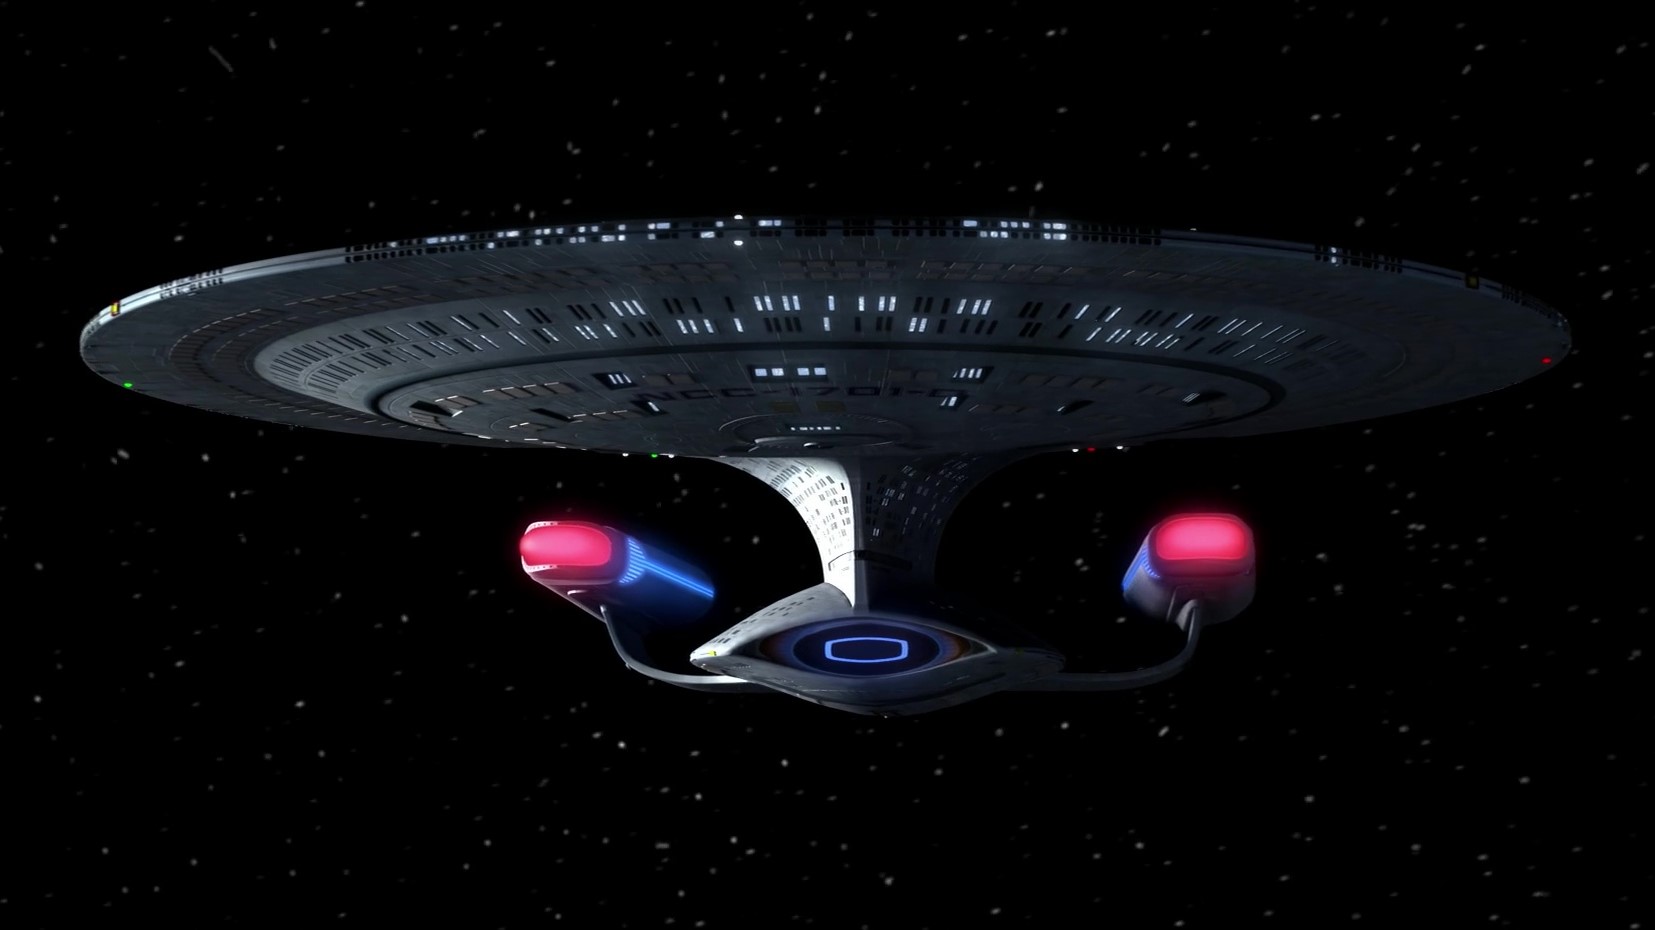 Spaceship in space -
USS Enterprise, NCC 1701-D -
from Star Trek, The Next Generation
